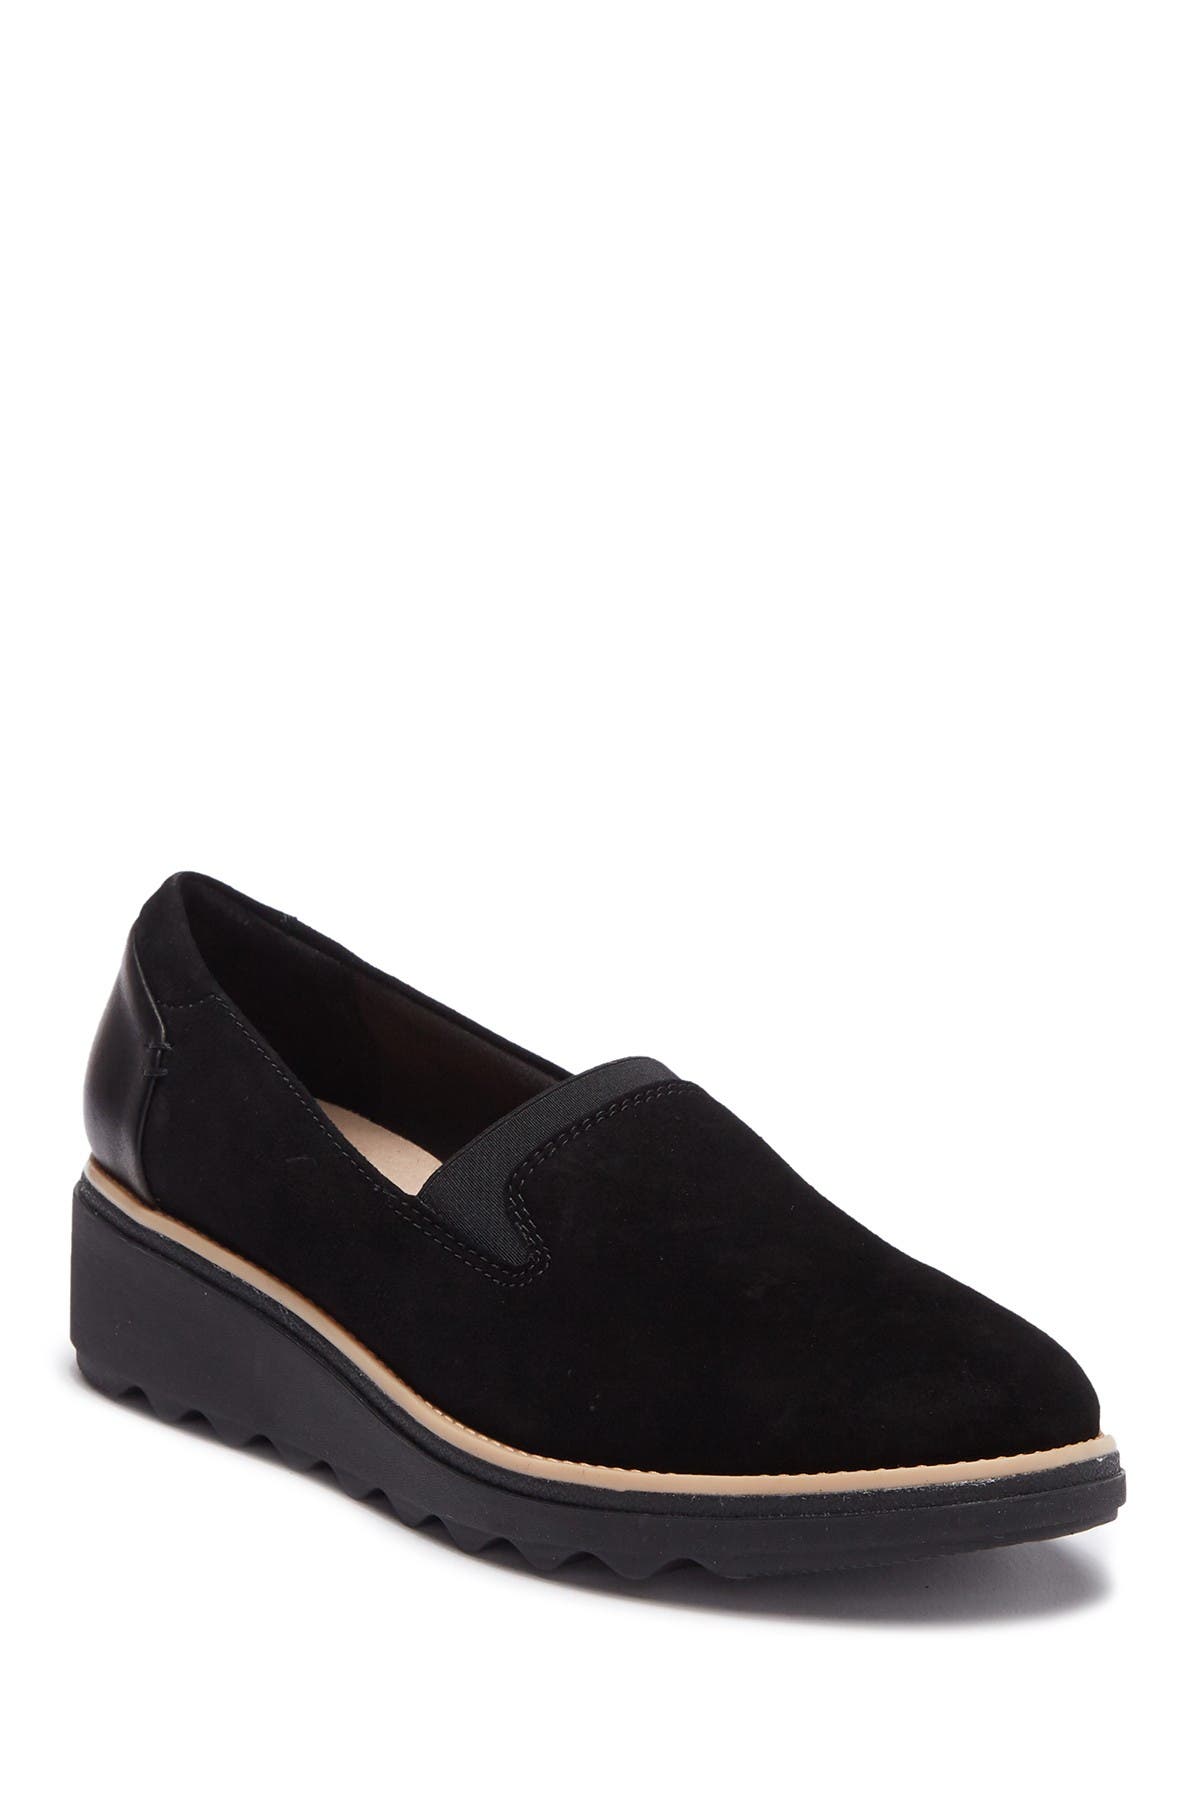 Clarks | Sharon Dolly Suede Wedge 